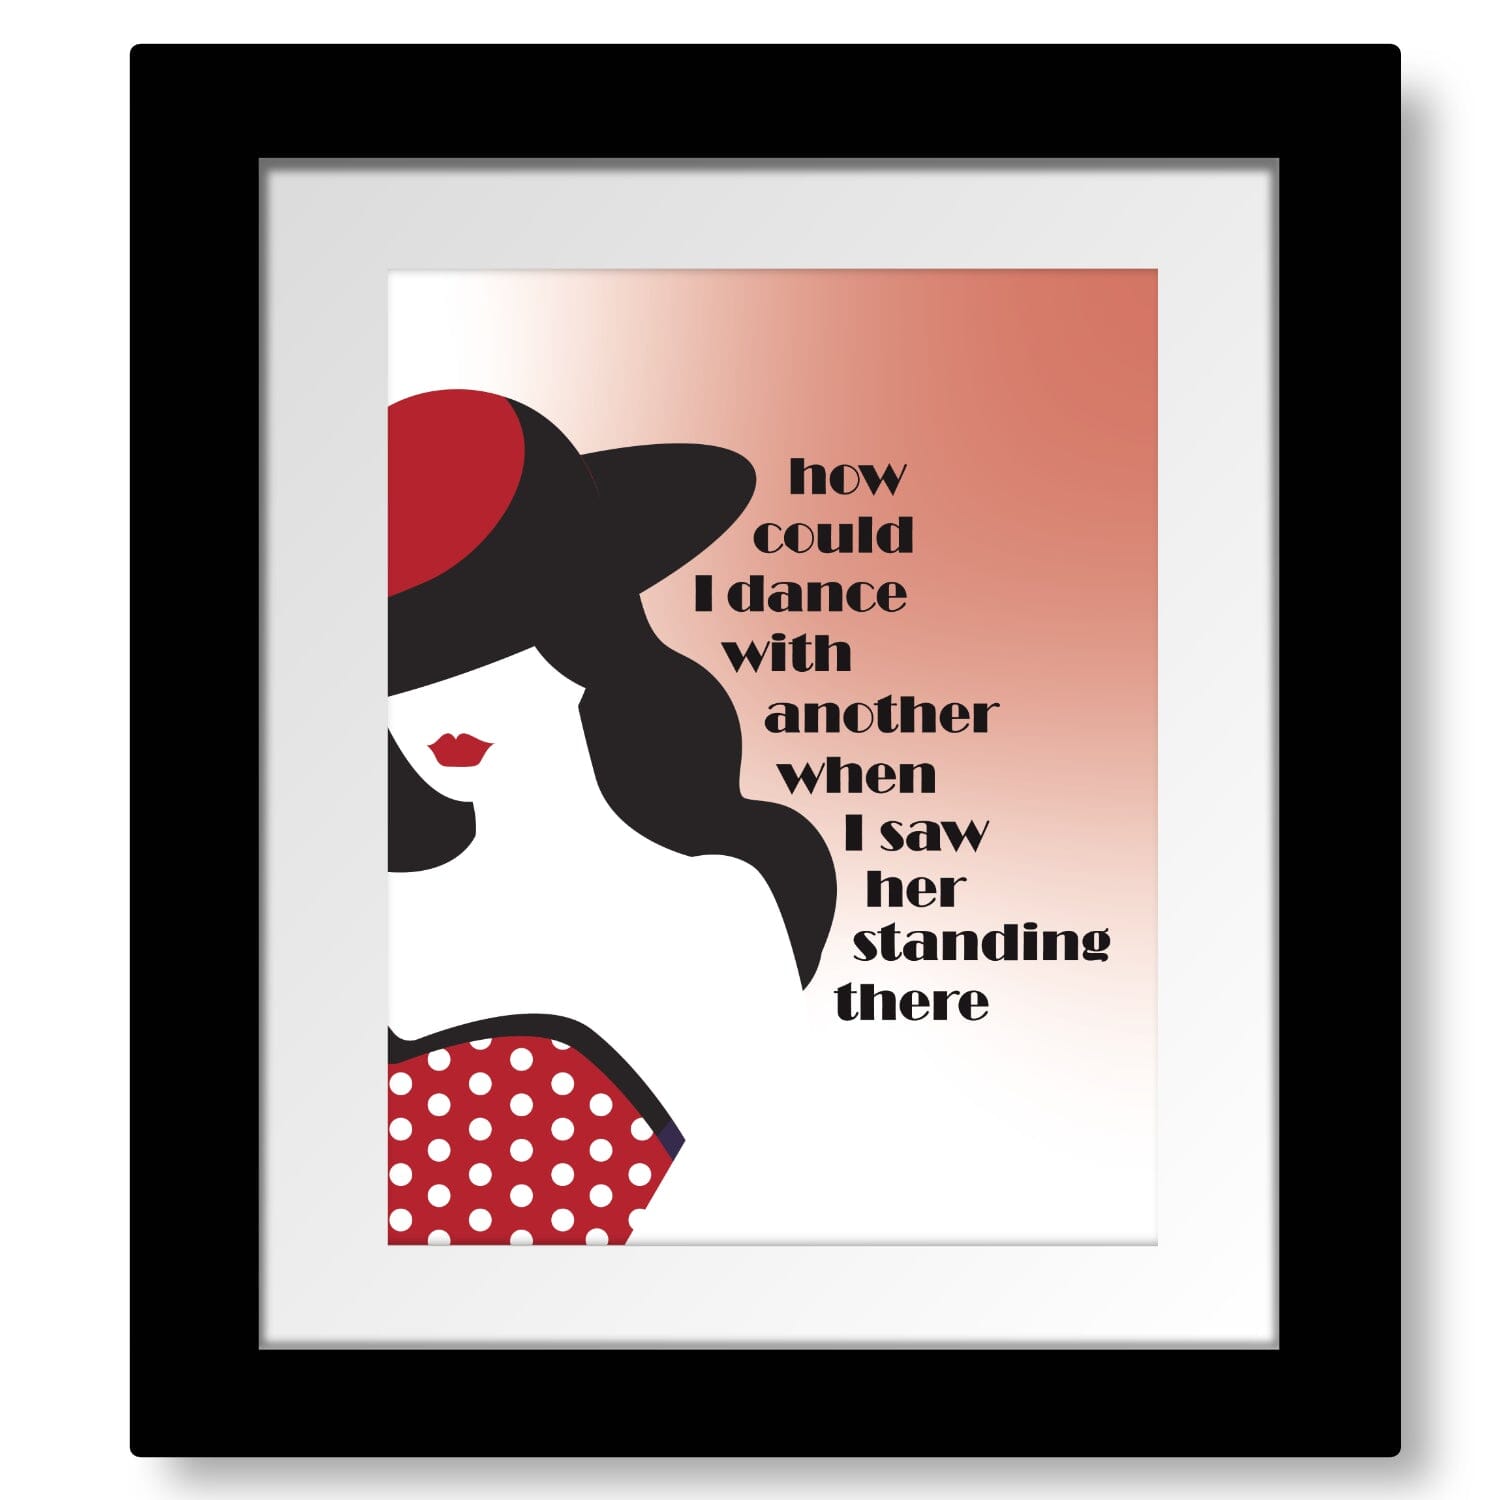 I Saw Her Standing There by the Beatles - Song Lyrics Print Song Lyrics Art Song Lyrics Art 8x10 Matted and Framed Print 